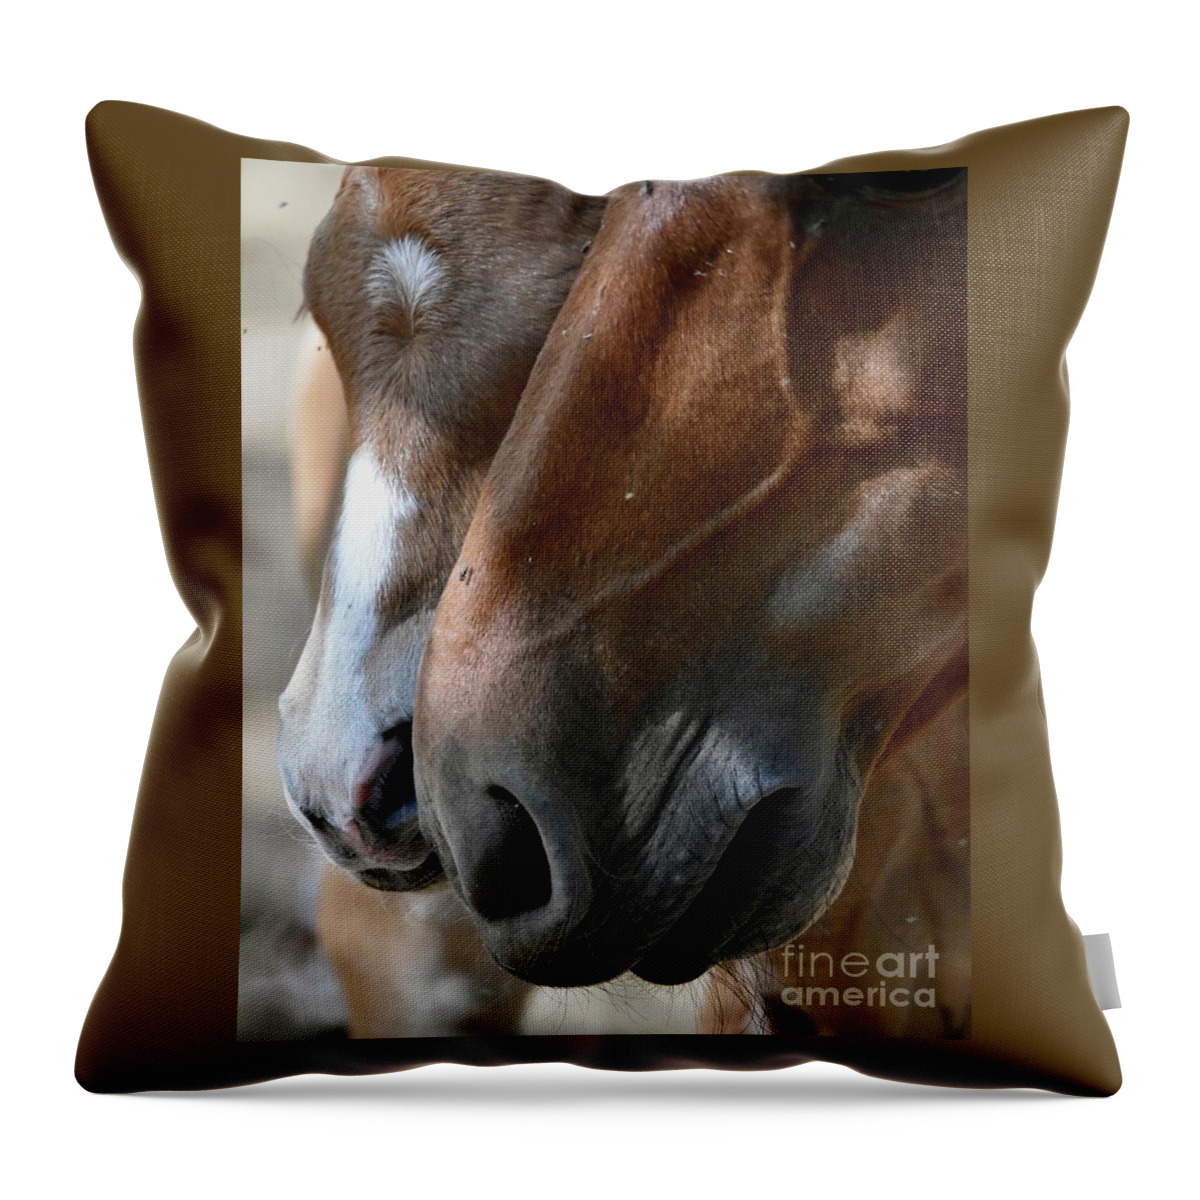 Salt River Wild Horses Throw Pillow featuring the digital art I Love You Mommy by Tammy Keyes